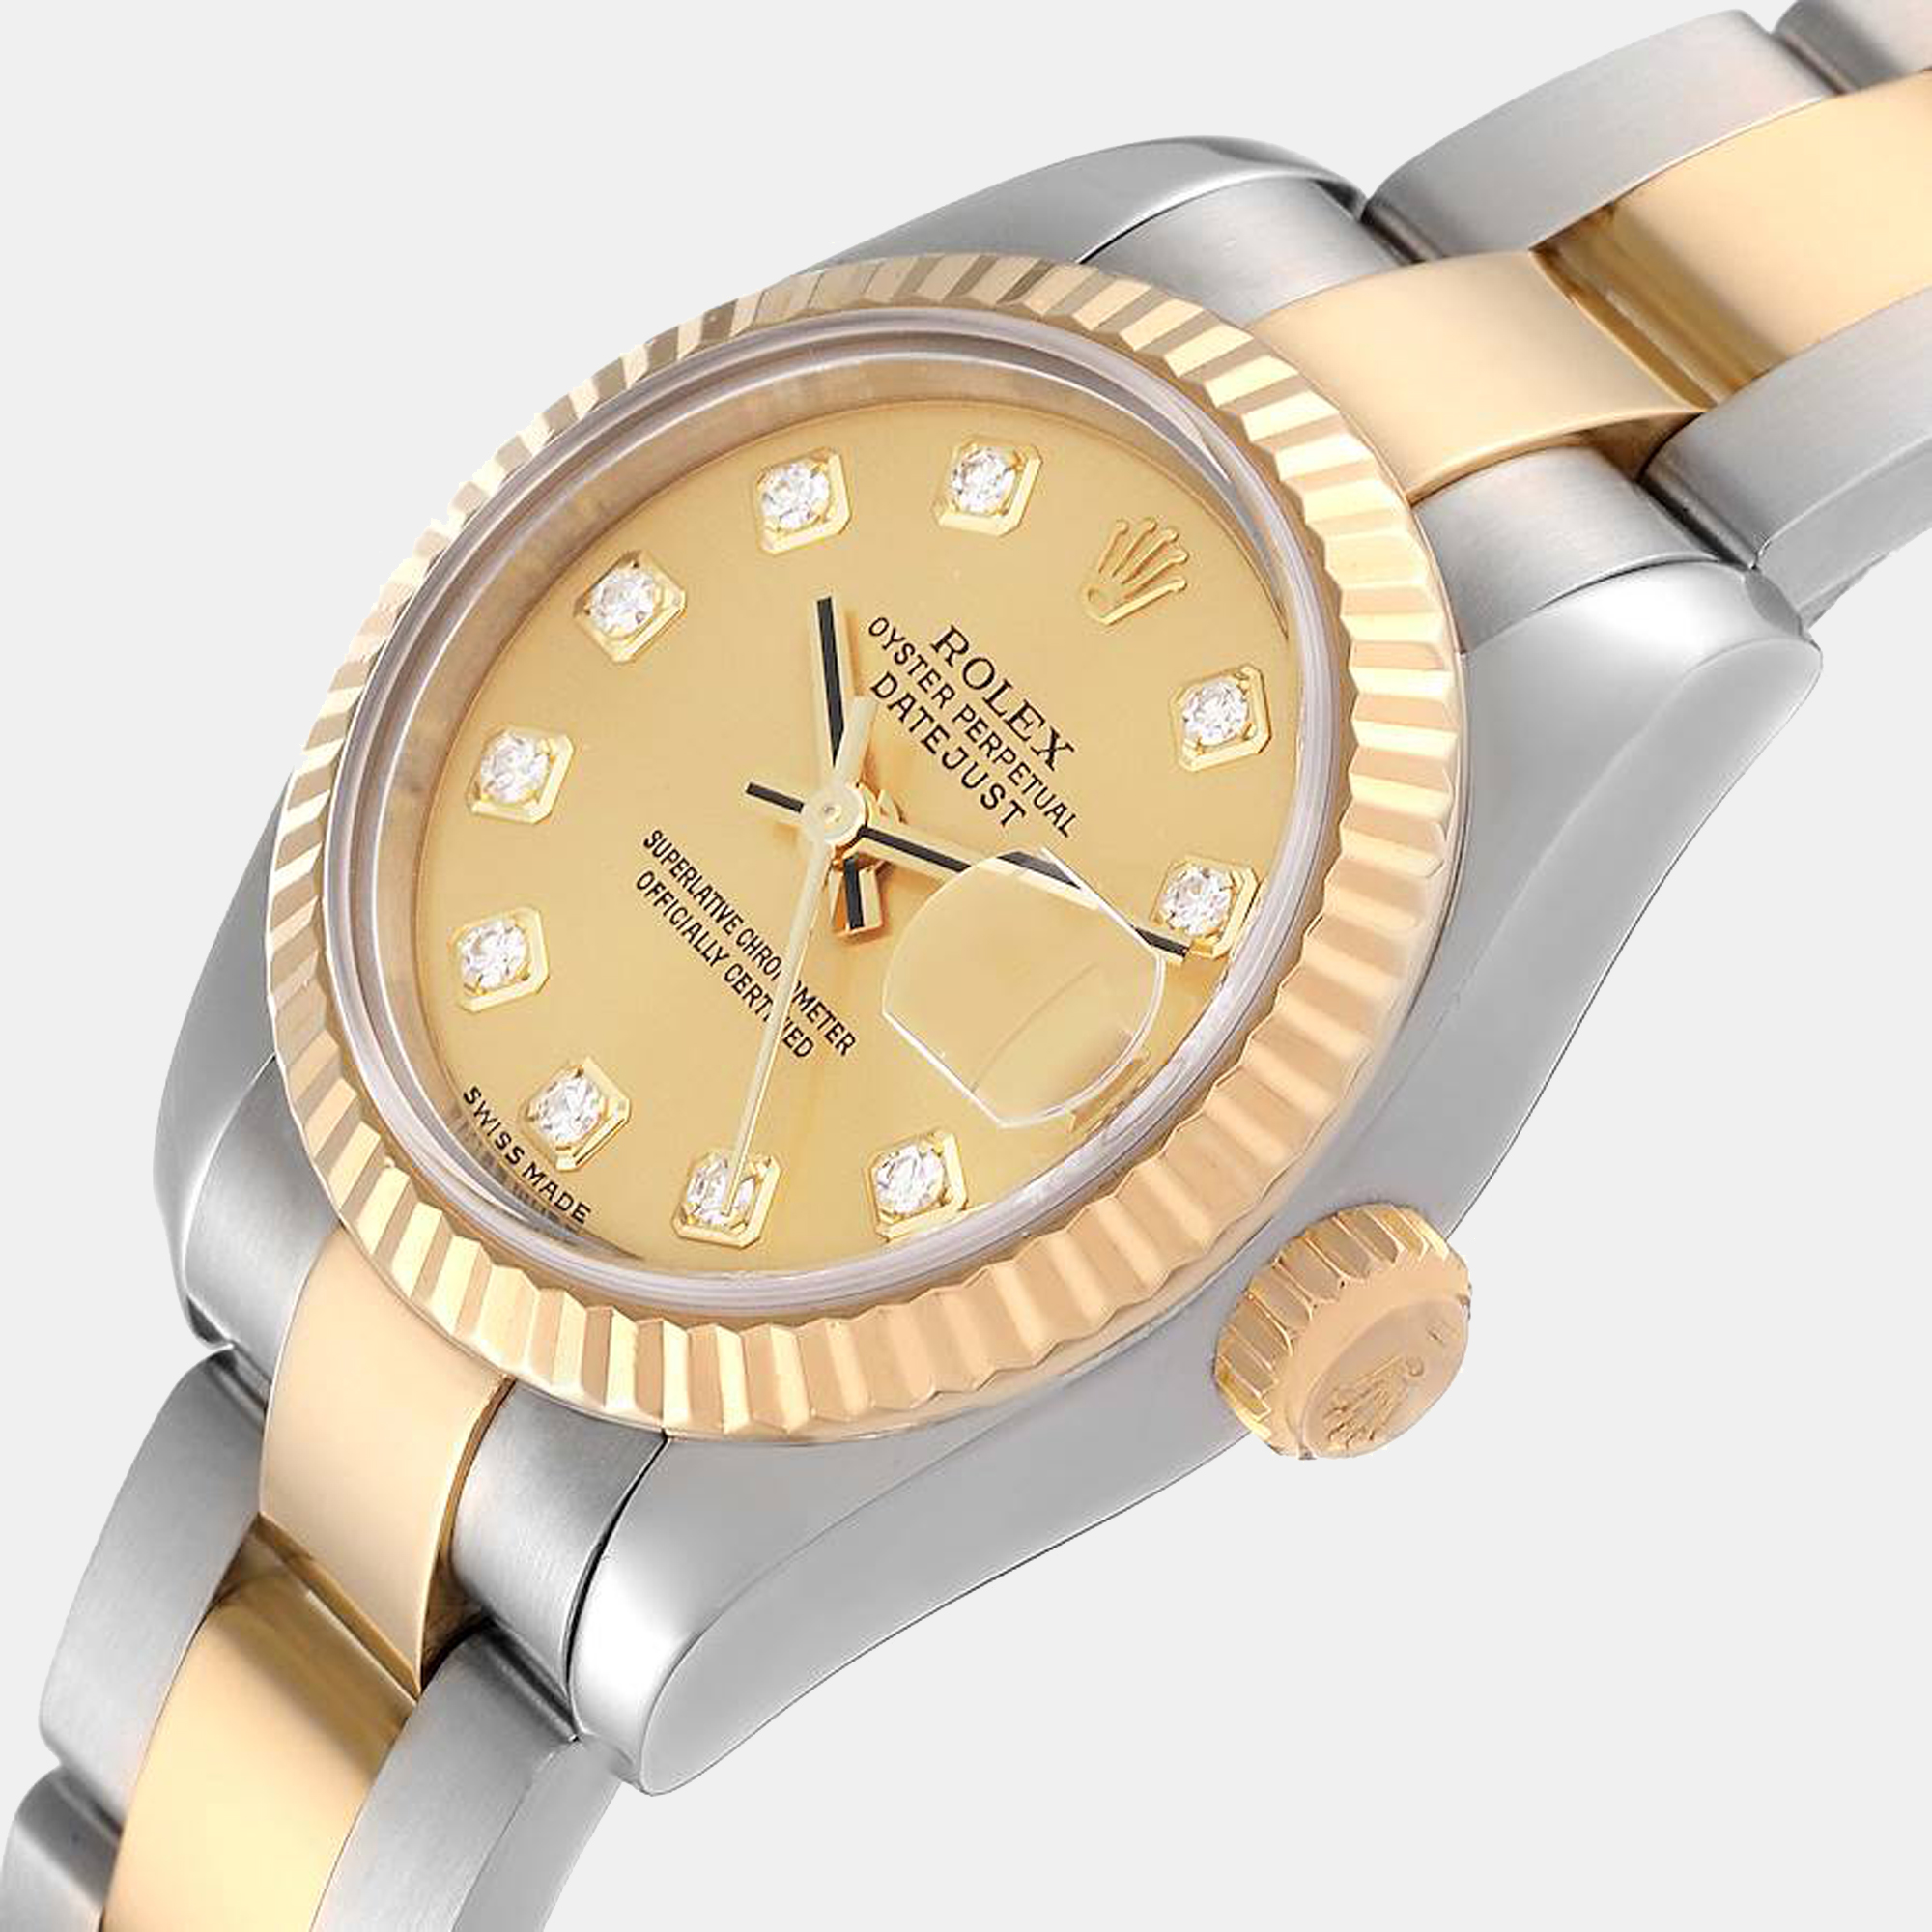 

Rolex Champagne Diamonds 18K Yellow Gold And Stainless Steel Datejust 179173 Women's Wristwatch 26 mm